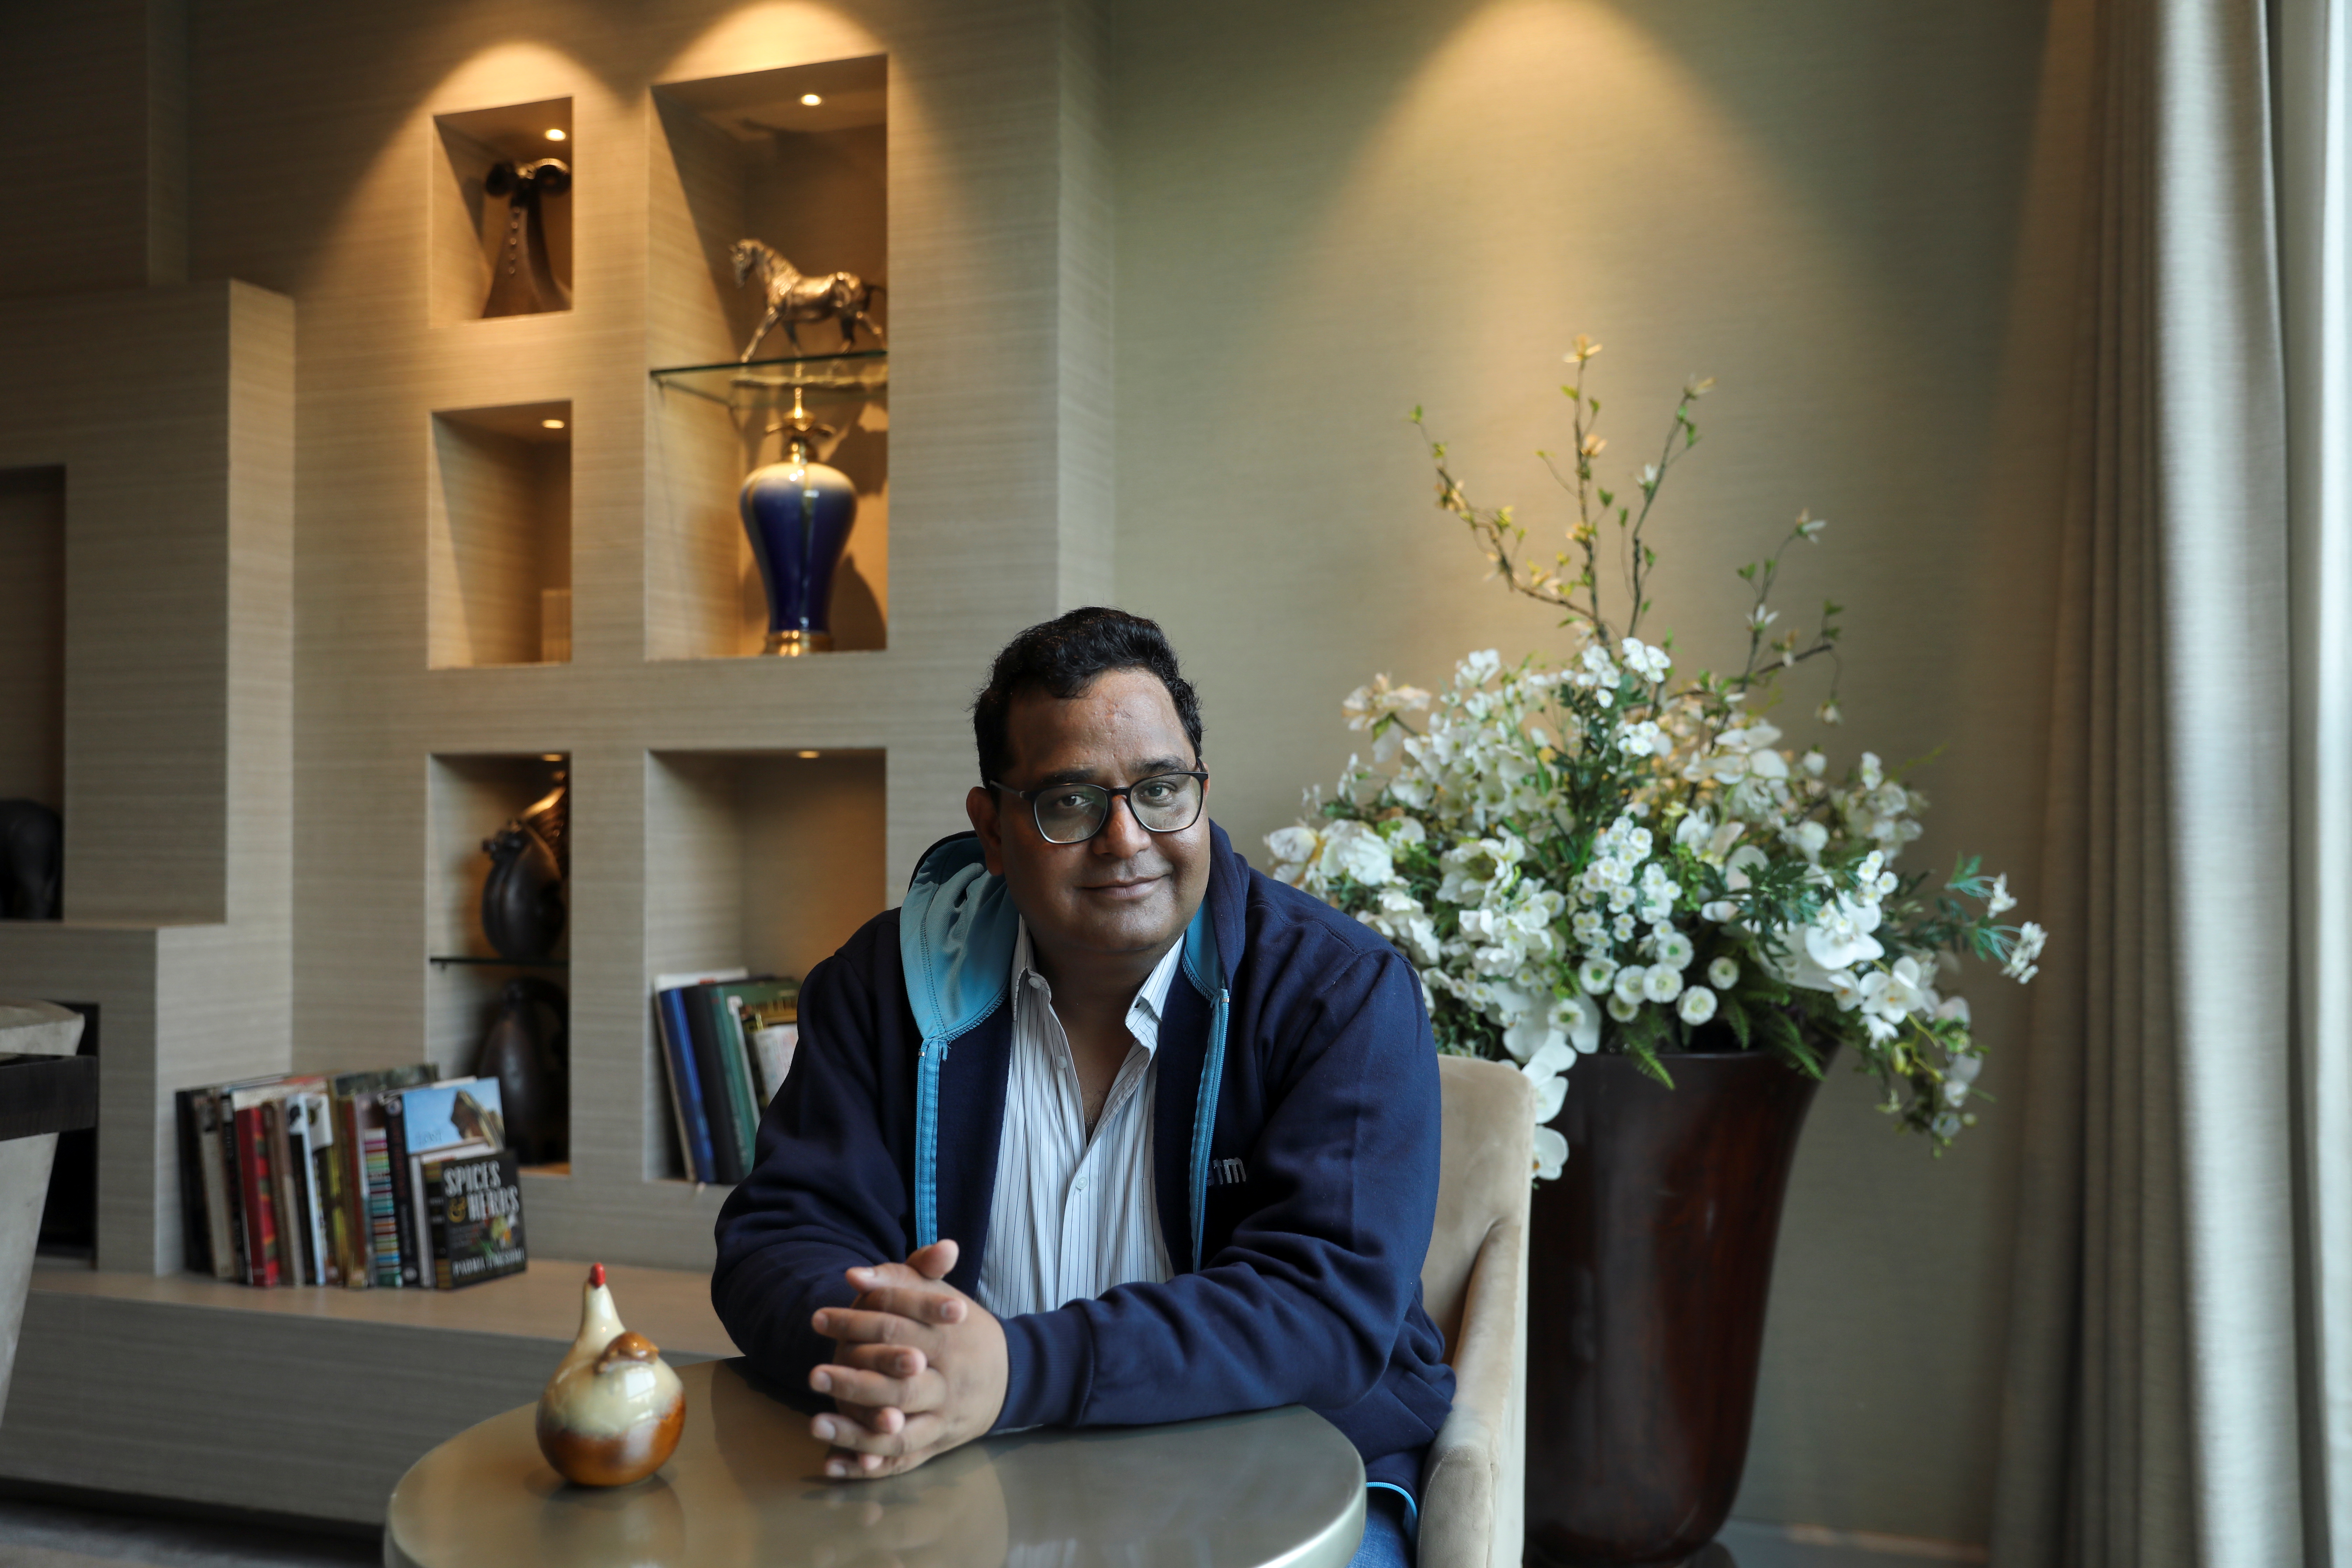 Paytm founder and CEO Vijay Shekhar Sharma poses for a picture at a clubhouse of a residential building in New Delhi